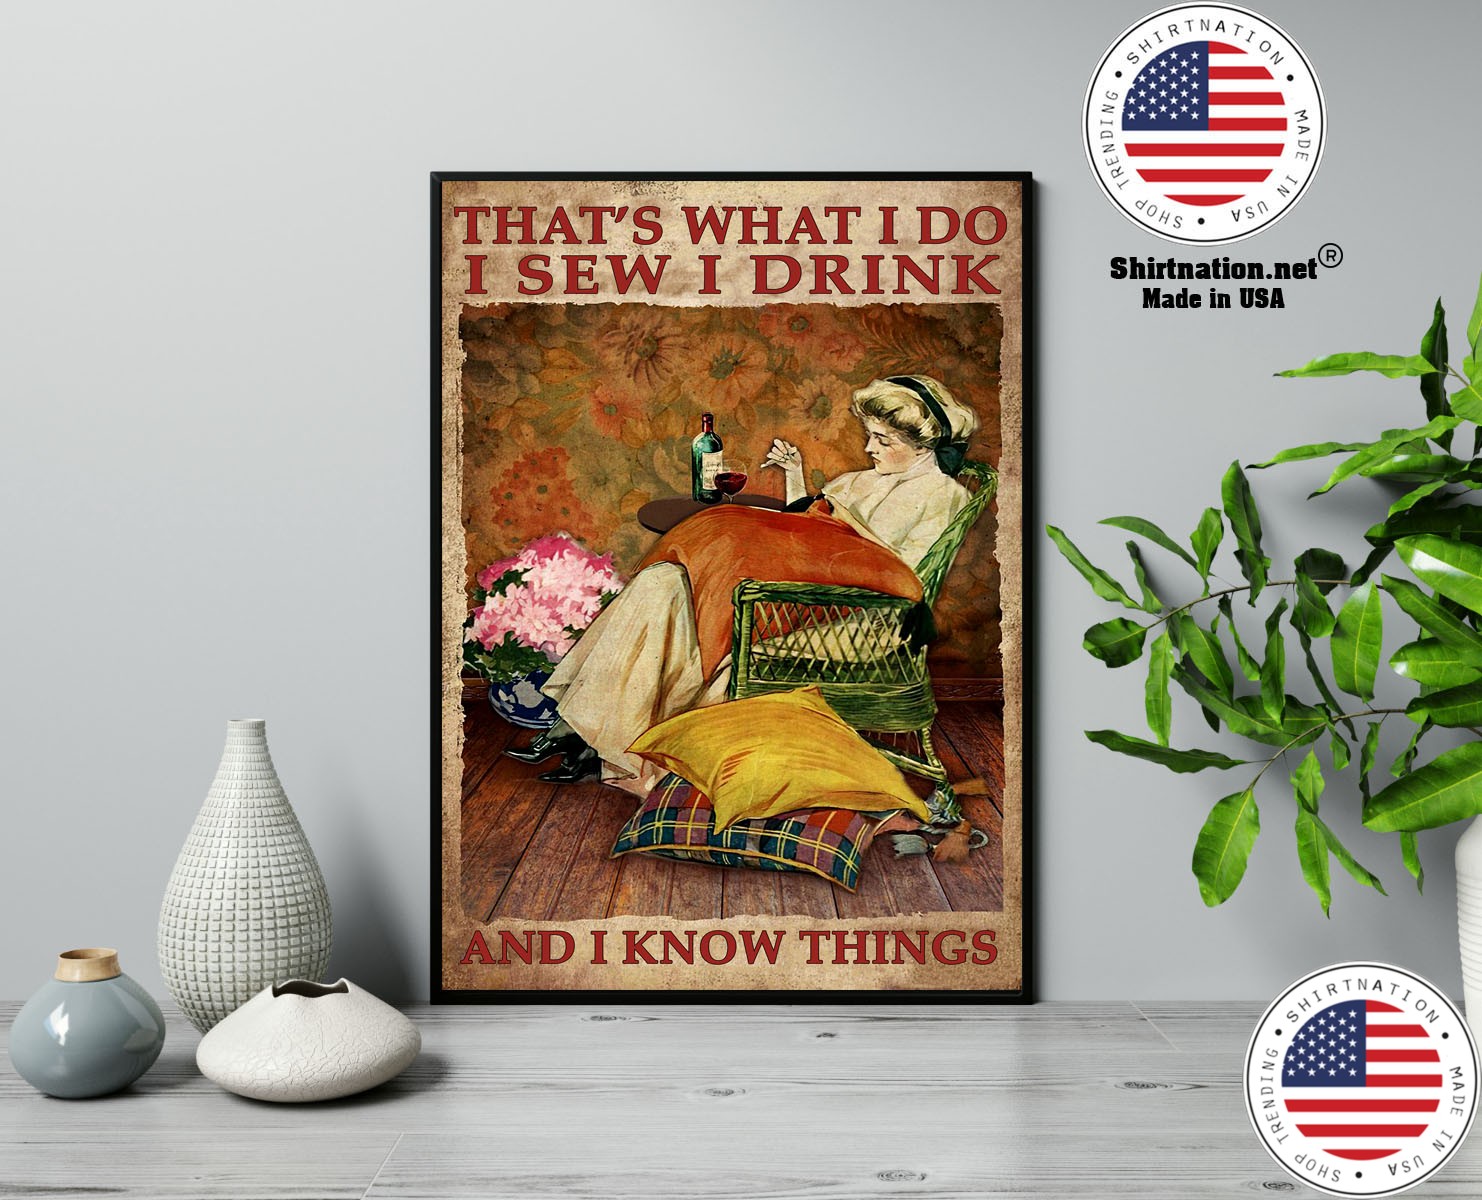 Thats what I do I sew I drink and I know things poster 13 1